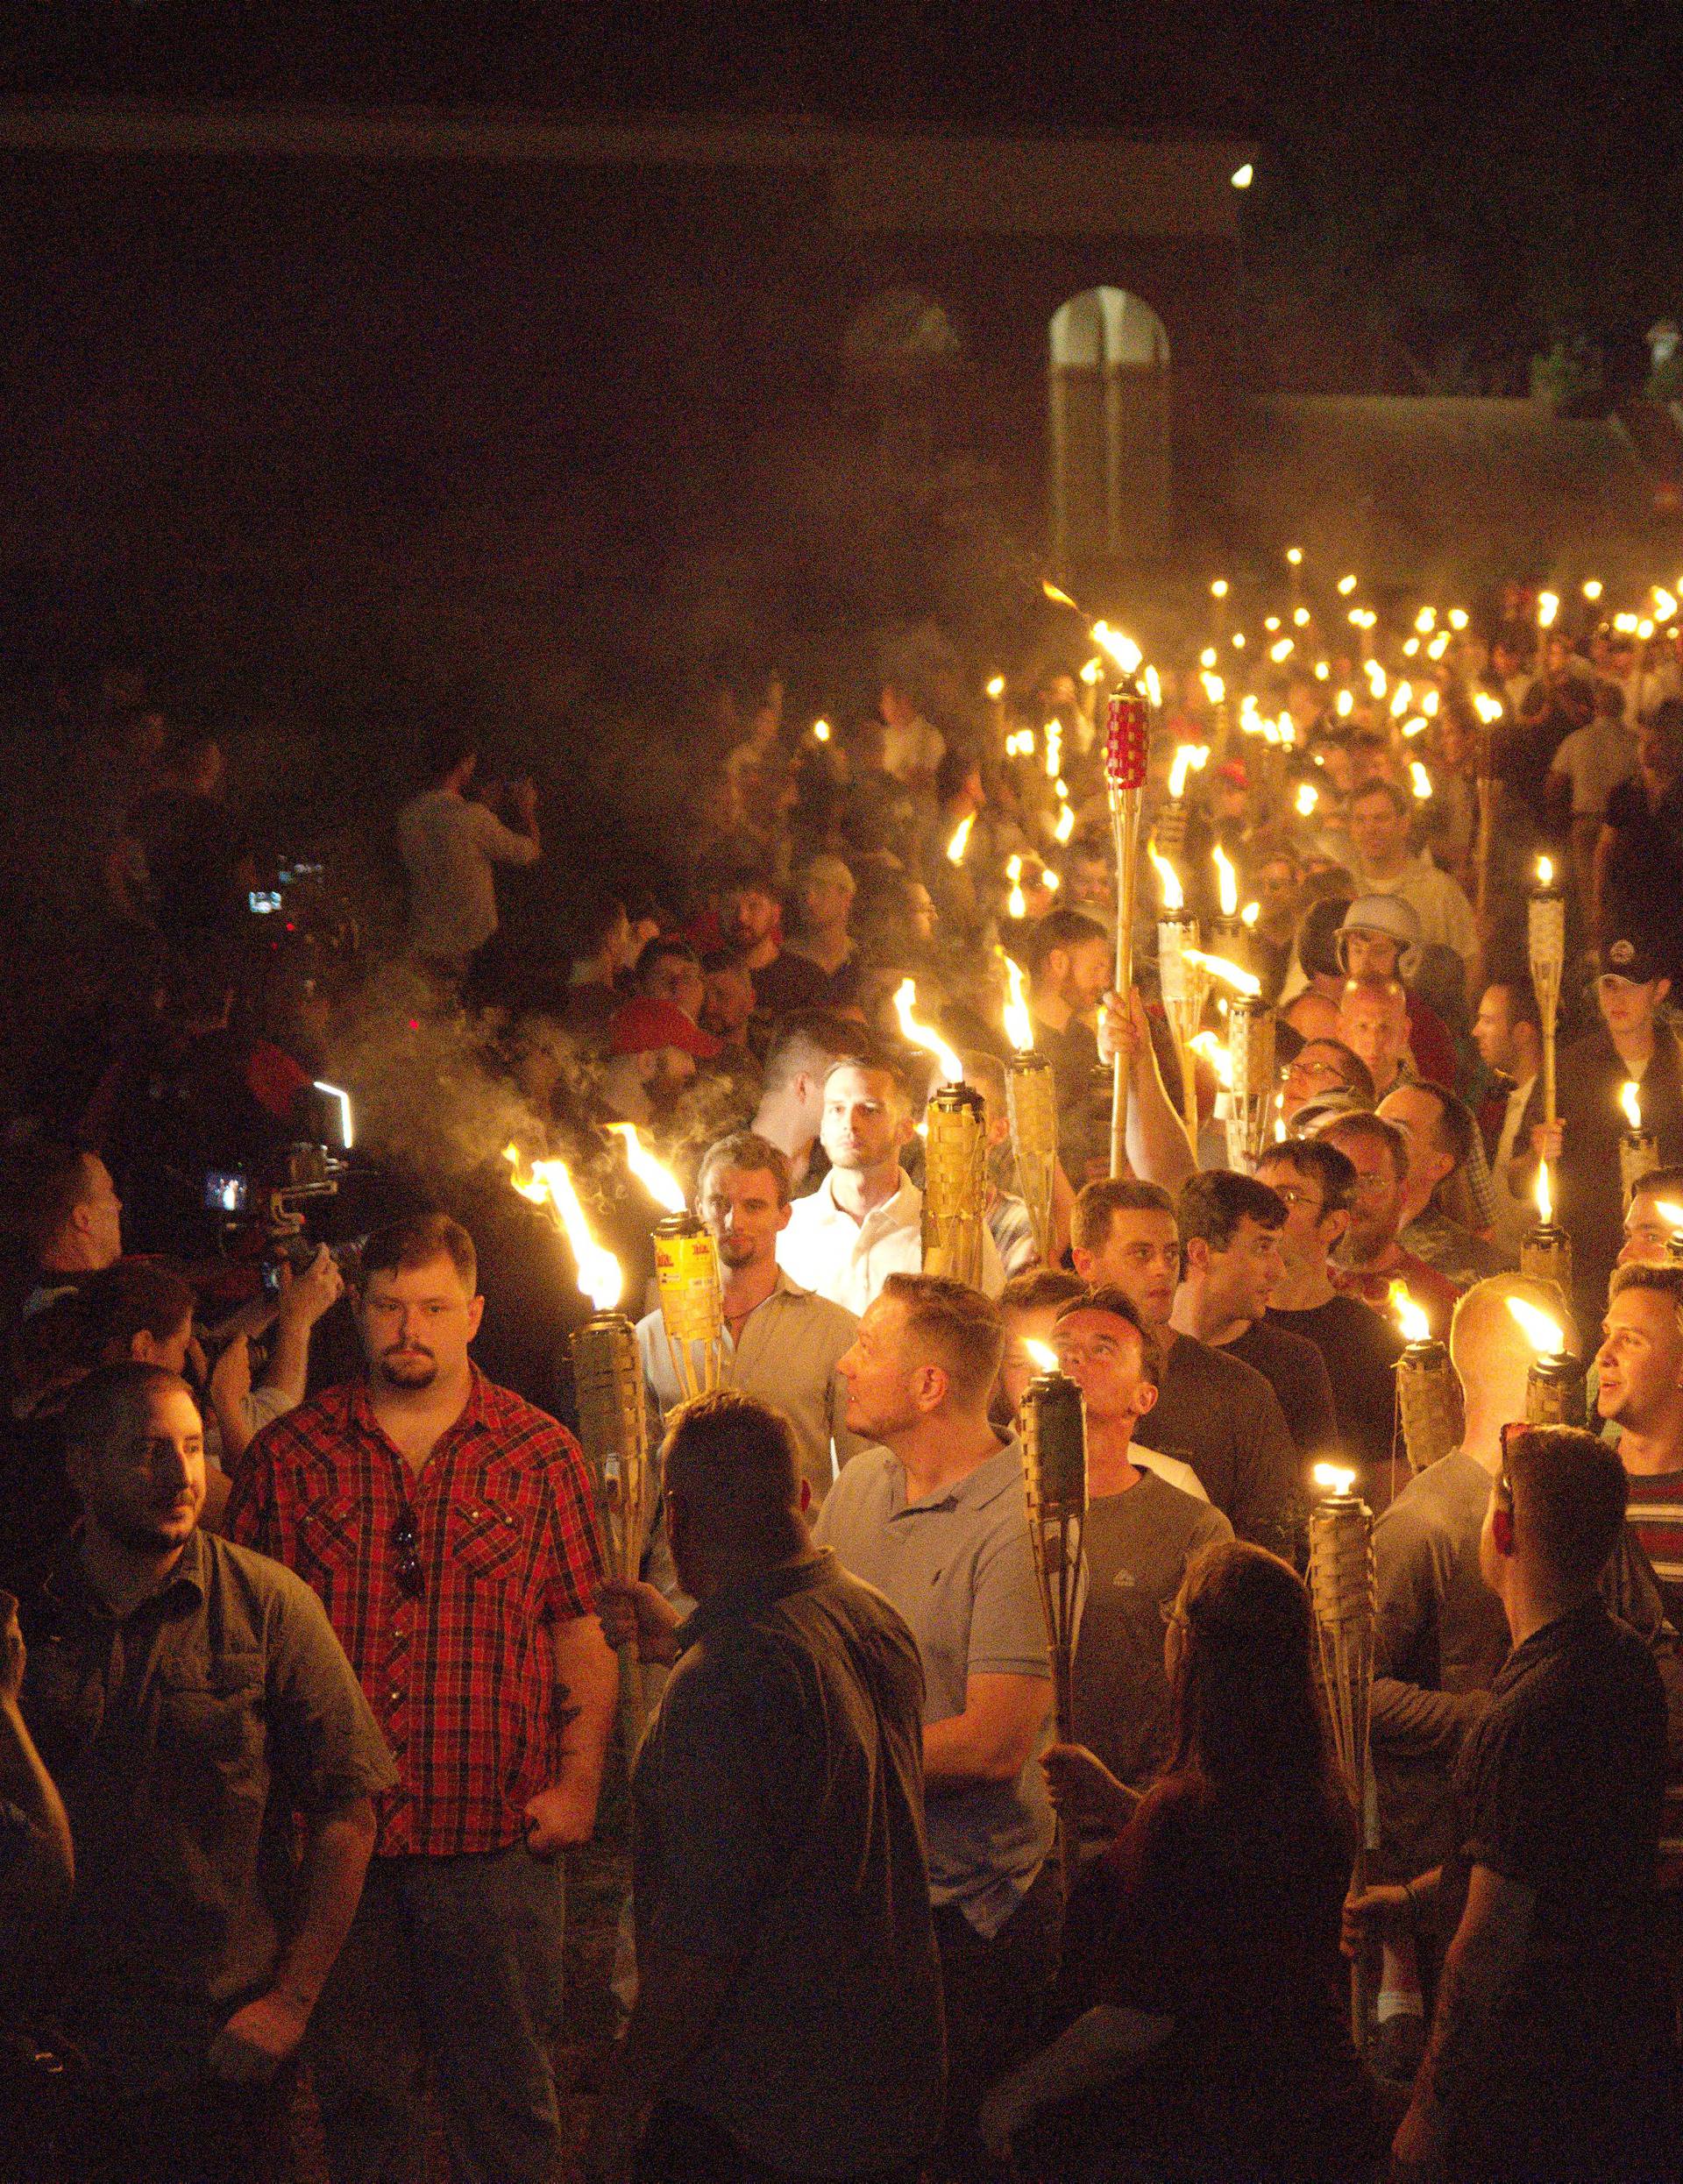 White nationalists carry torches on the grounds of the University of Virginia, on the eve of a planned Unite The Right rally in Charlottesville